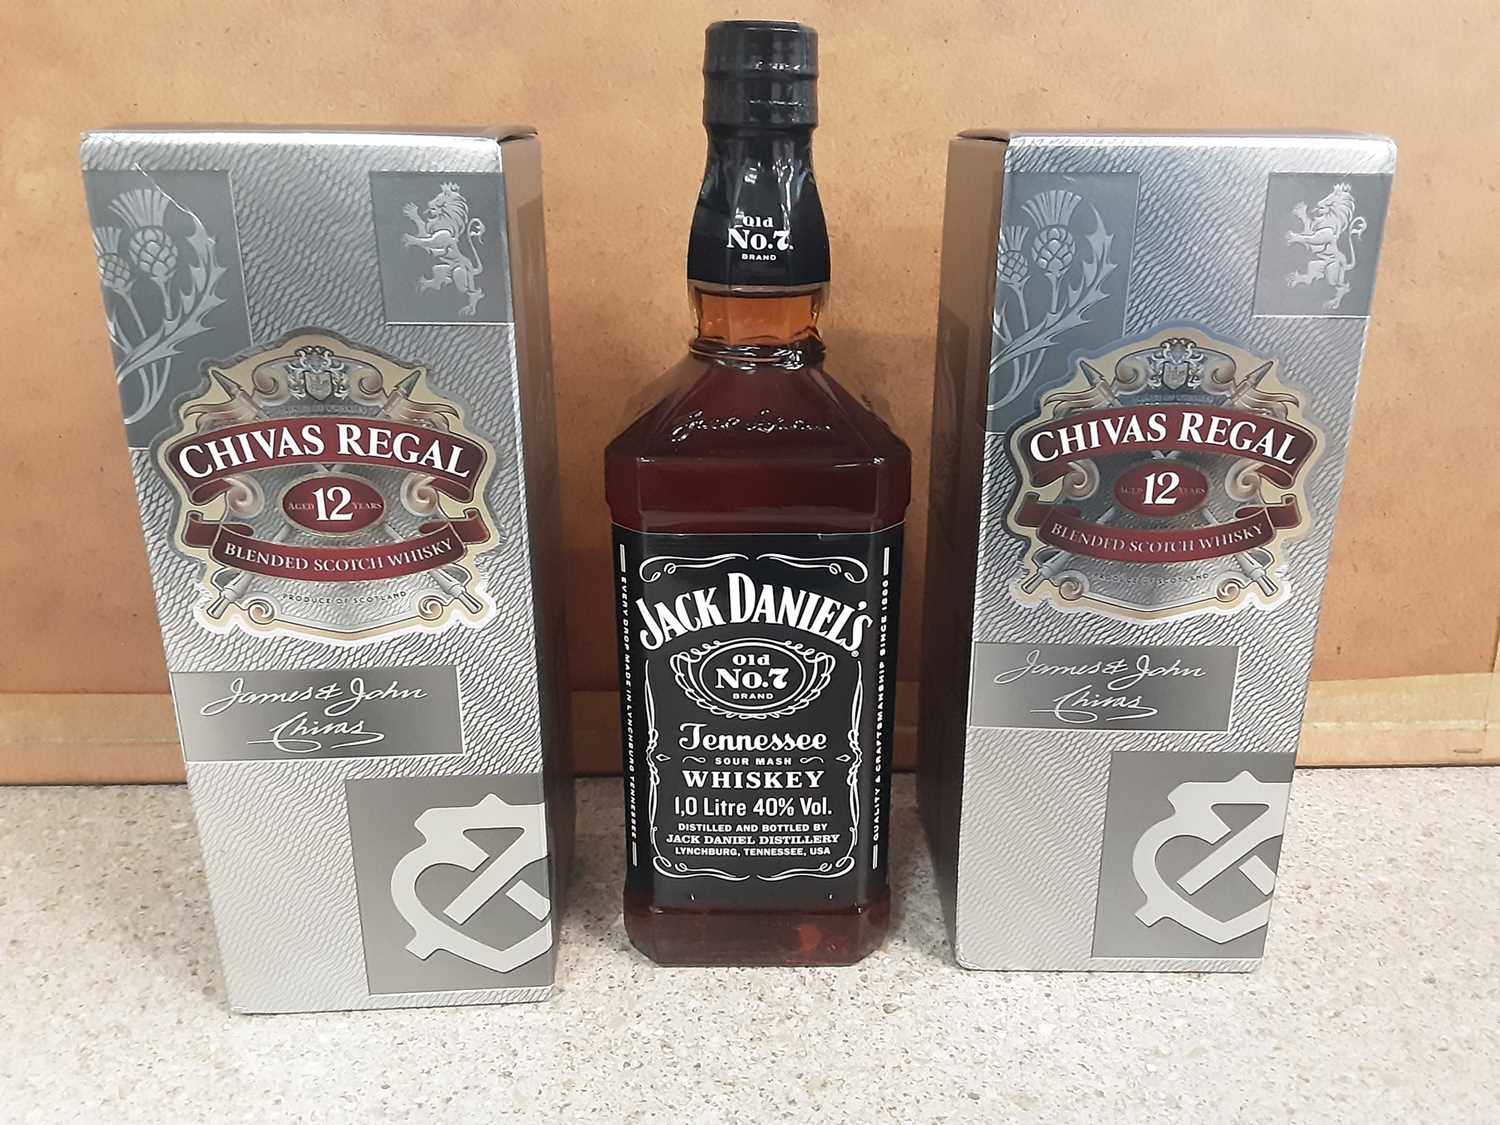 Lot 7 - Two bottles of Chivas Regal 70cl aged 12 years blended scotch whisky, in original boxes, and a 1 litre bottle of Jack Daniels (3)